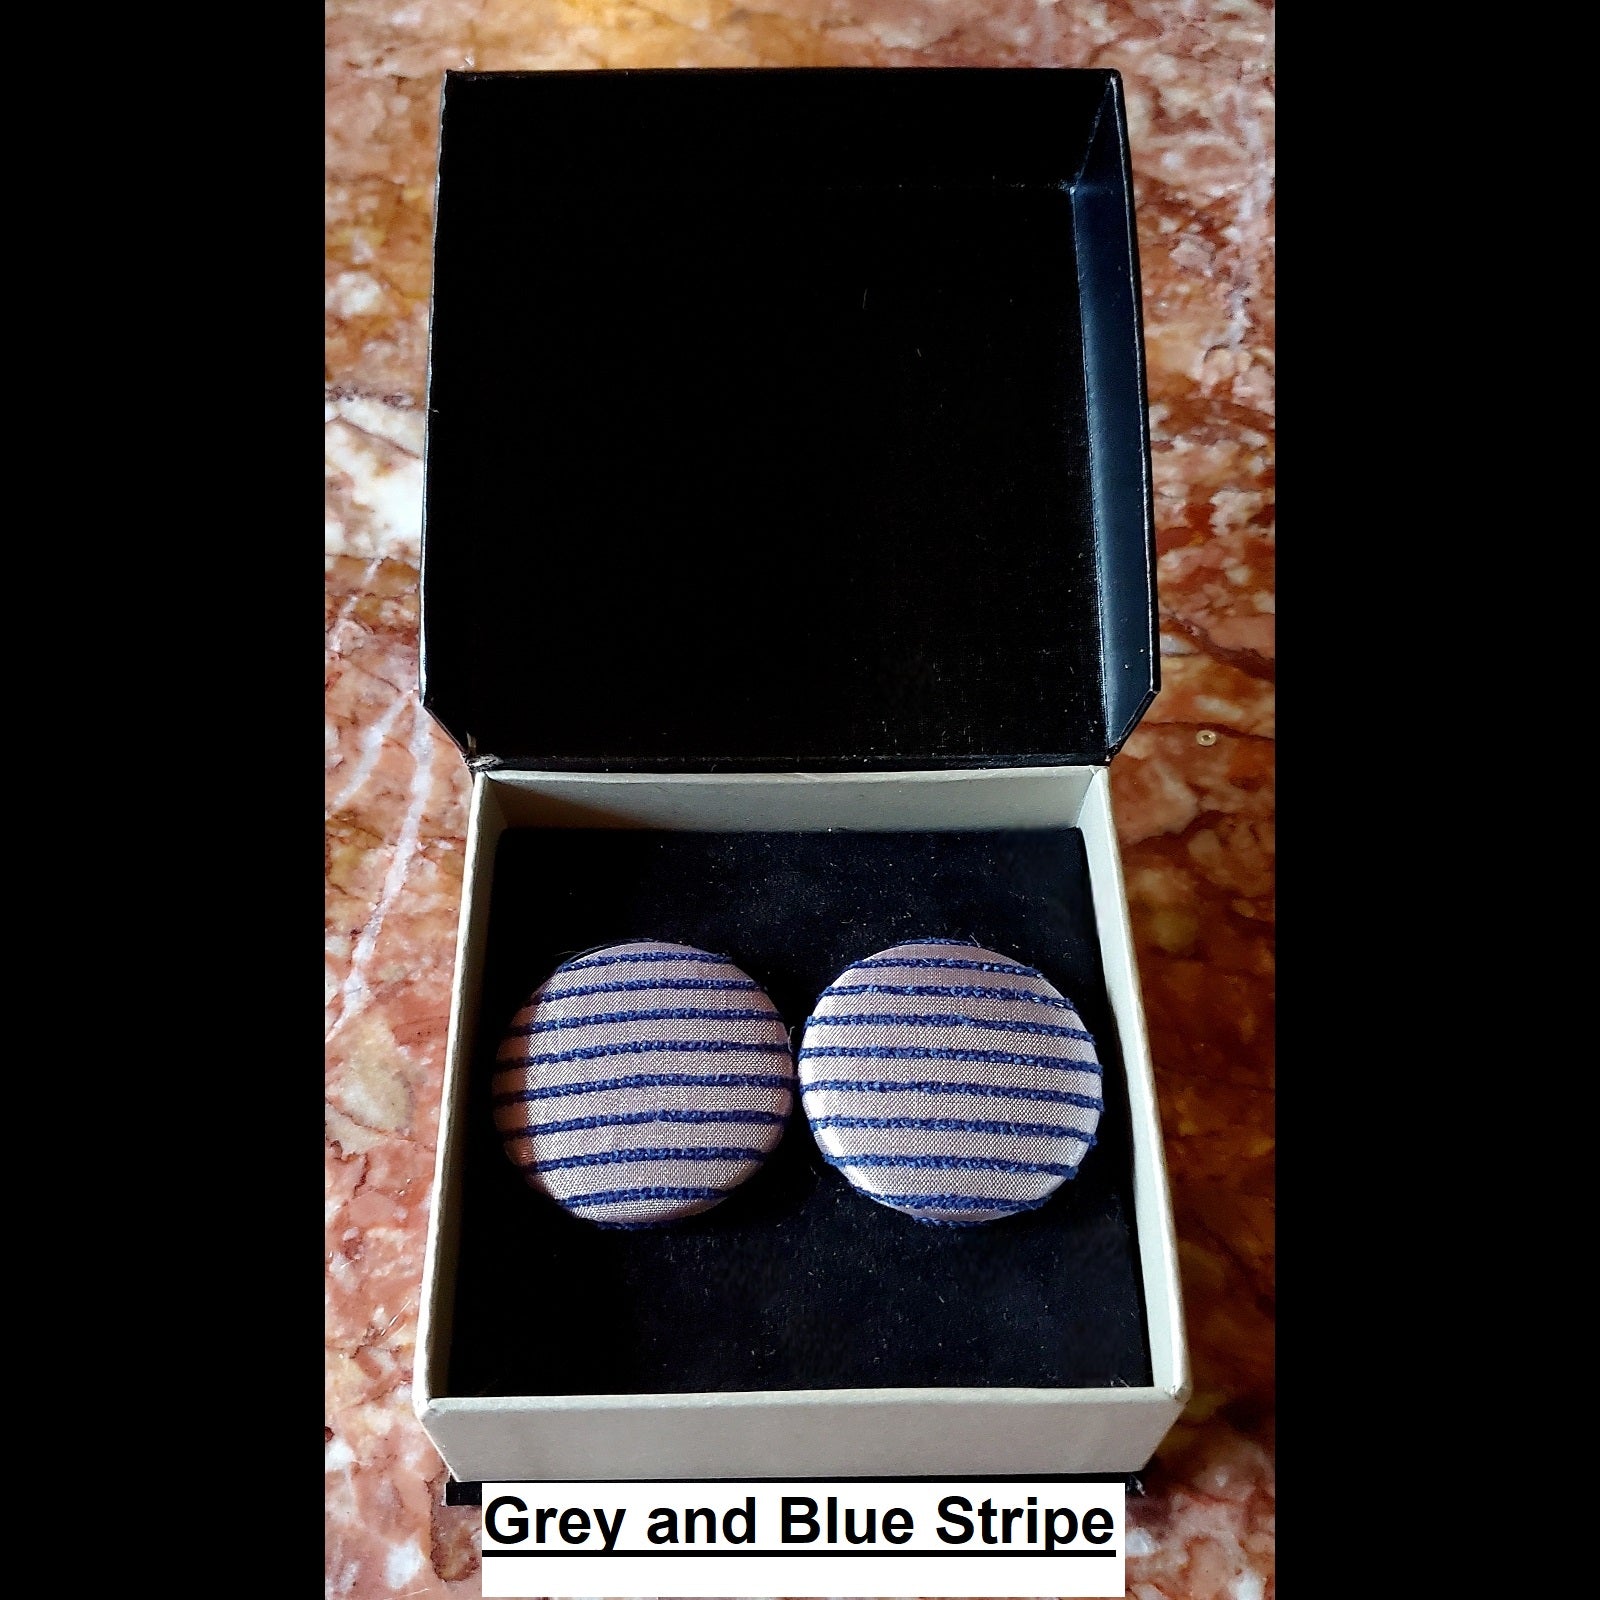 Grey and blue stripeprint button earrings in jewelry box 